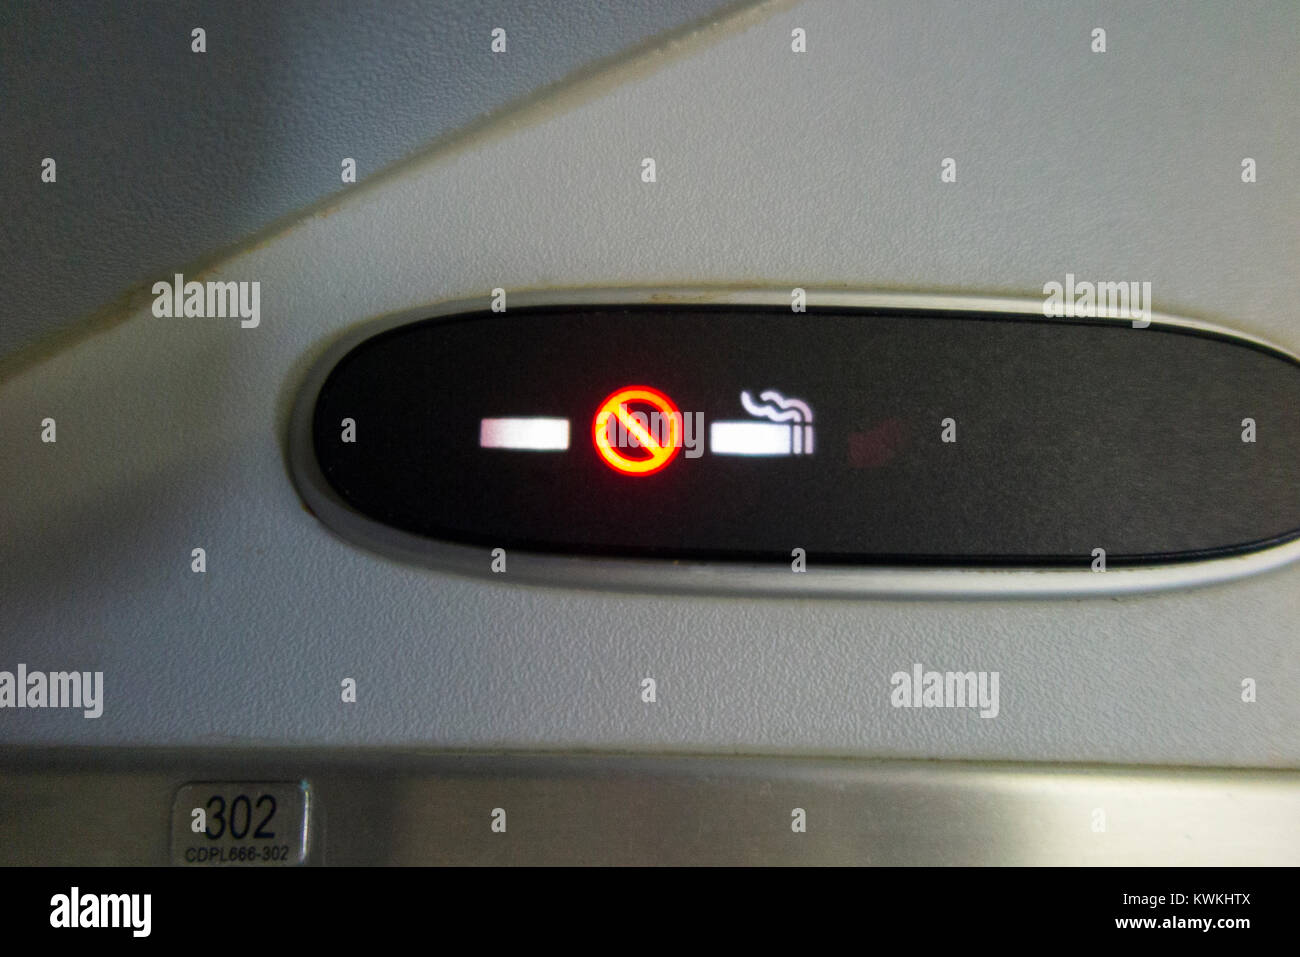 Aircraft 'no smoking' / none / non cigarette sign lit up & illuminated during a flight in an Embraer 190 plane / aeroplane / airplane. (93) Stock Photo